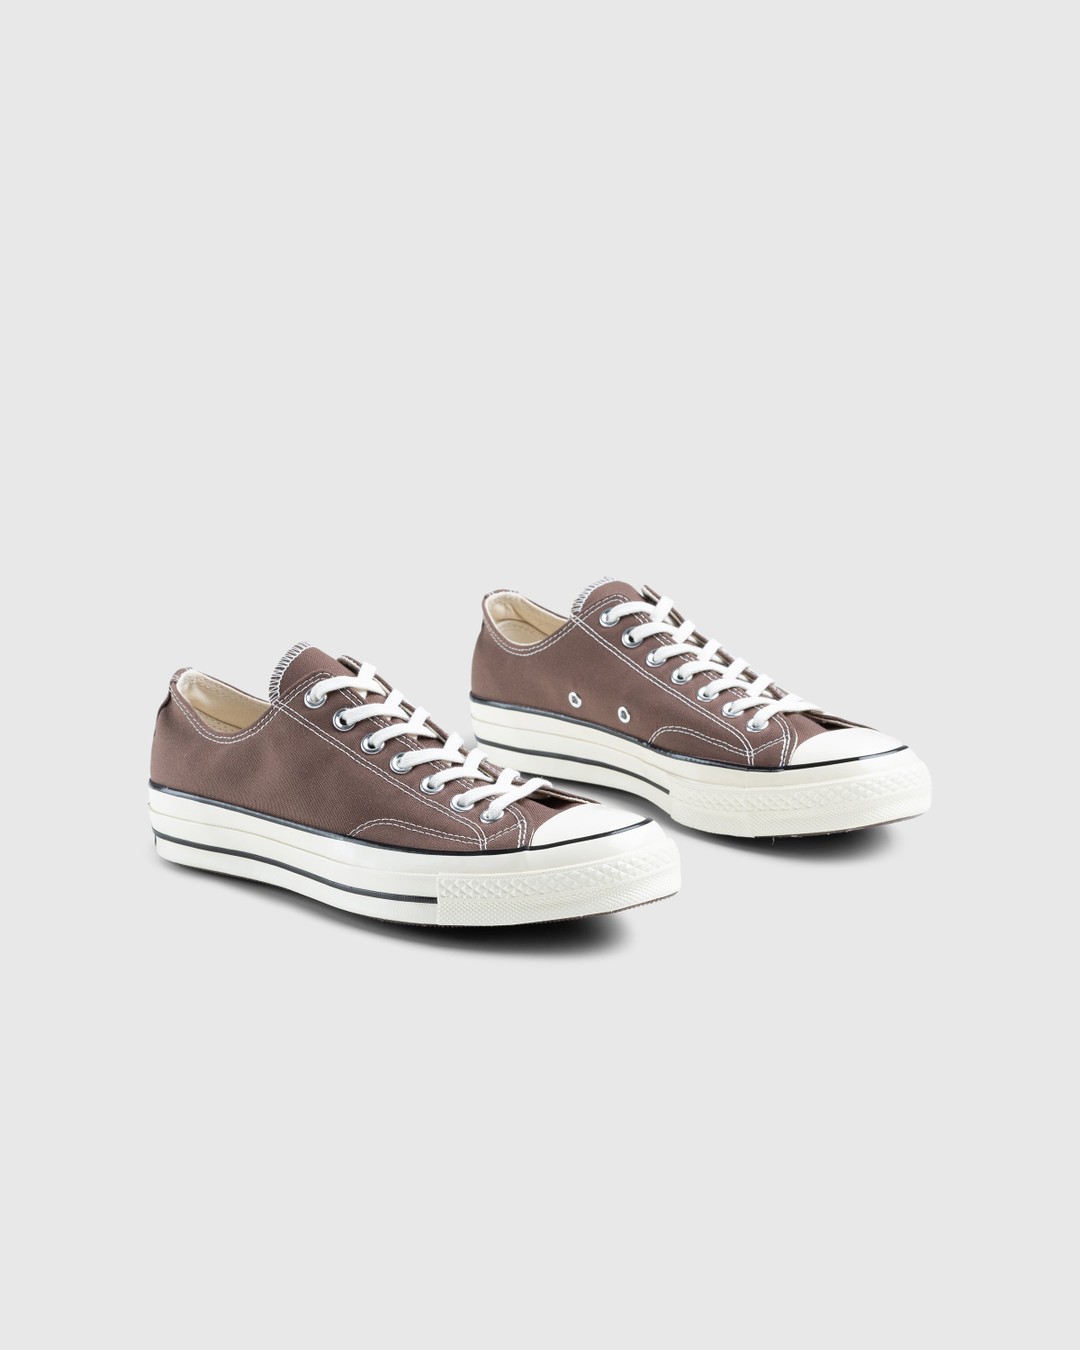 Converse – Chuck 70 Ox Squirrel Friend/Egret/Black - Low Top Sneakers - Brown - Image 3